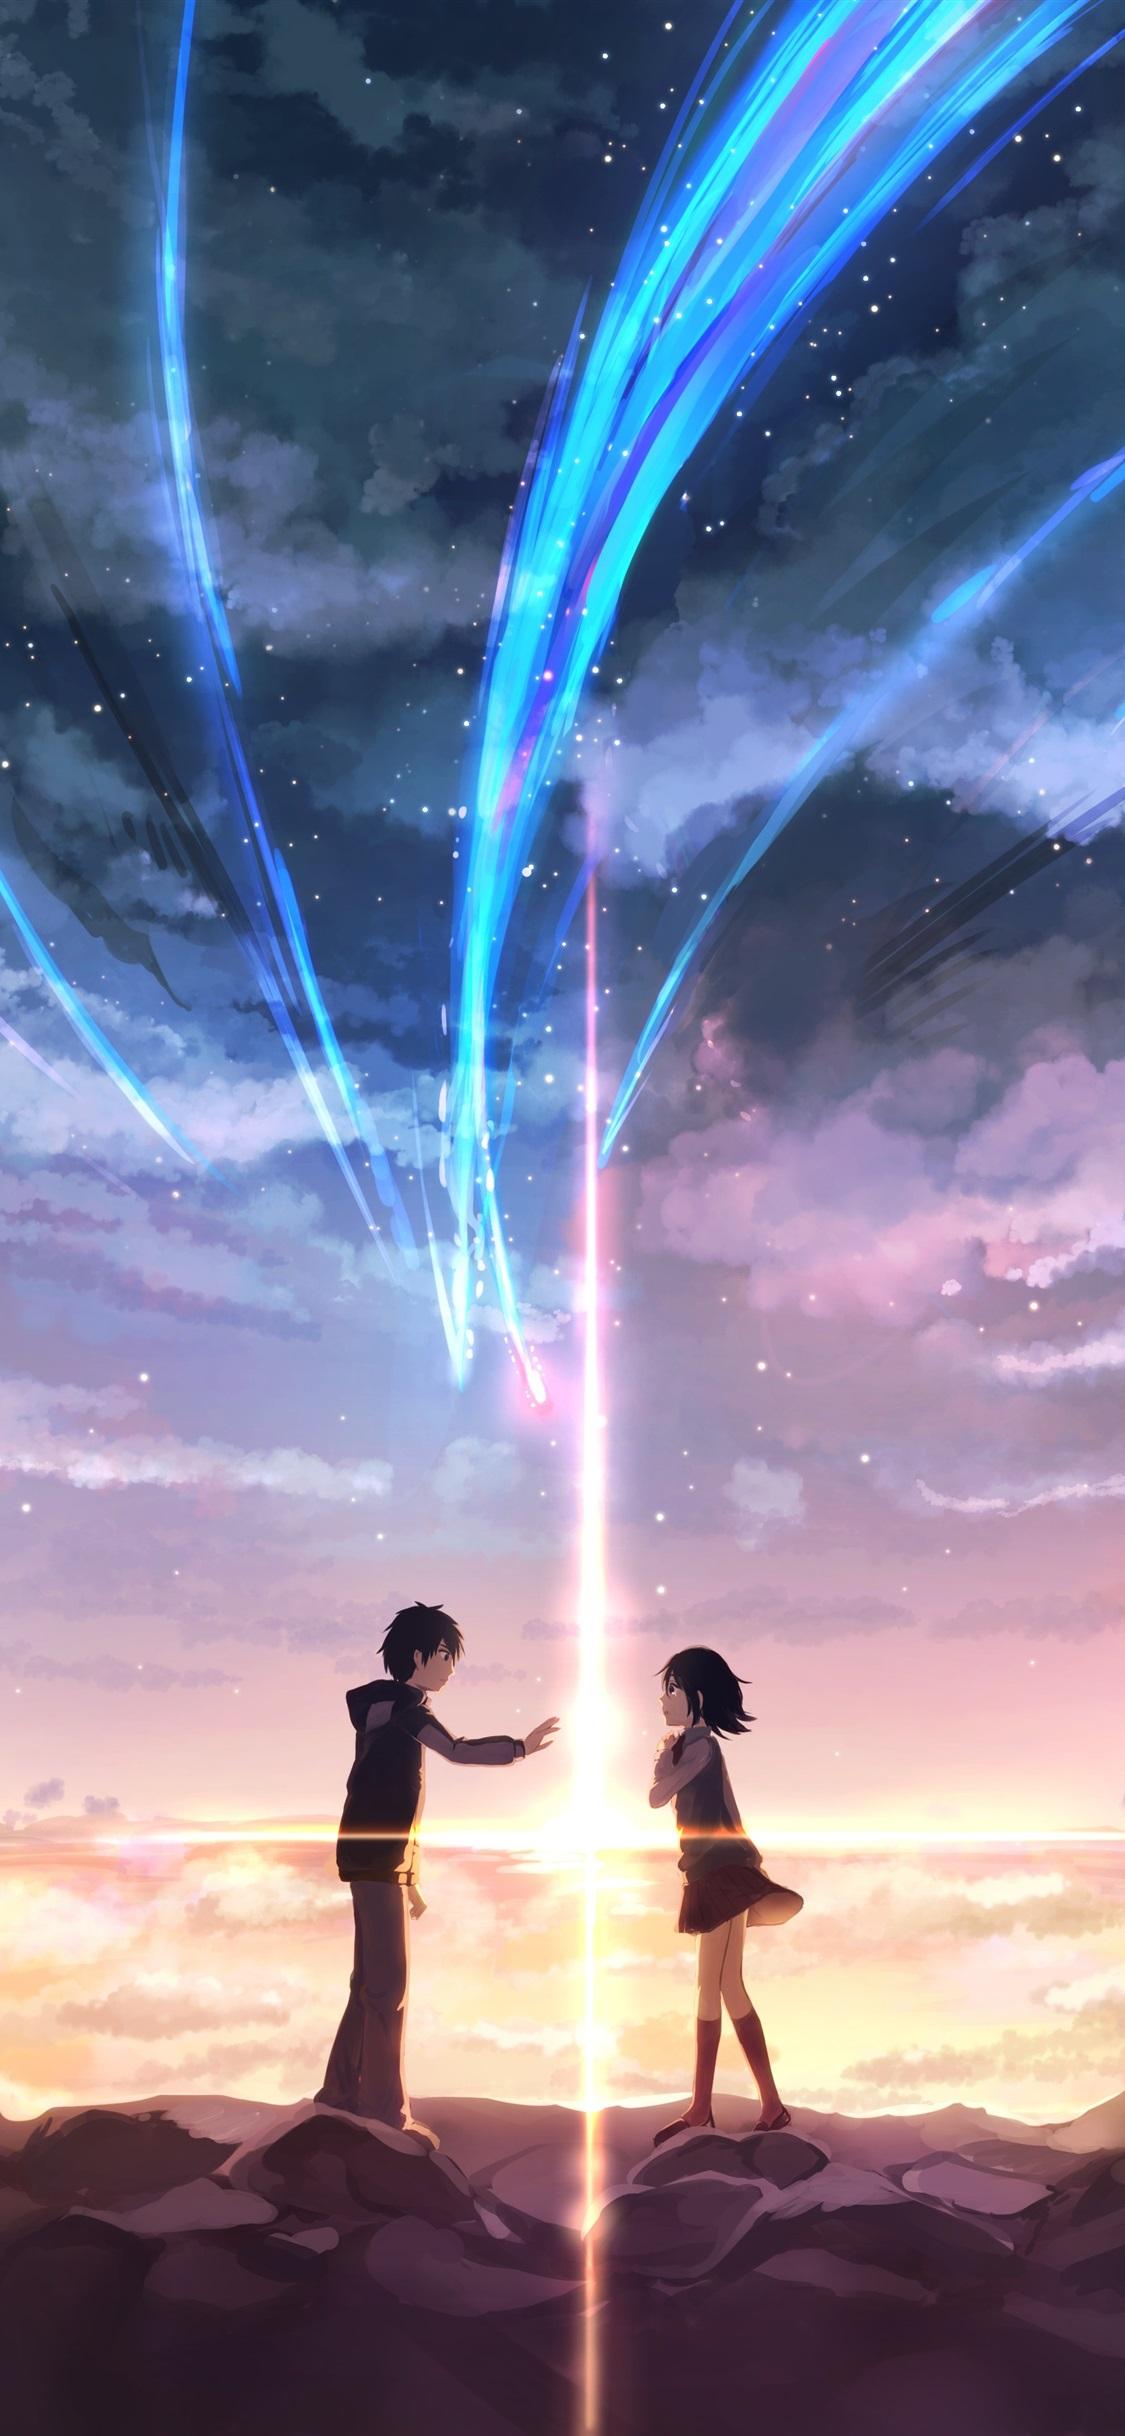 Your Name, Girl And Boy, Love, Japanese Anime 1125x2436 IPhone 11 Pro XS X Wallpaper, Background, Picture, Image